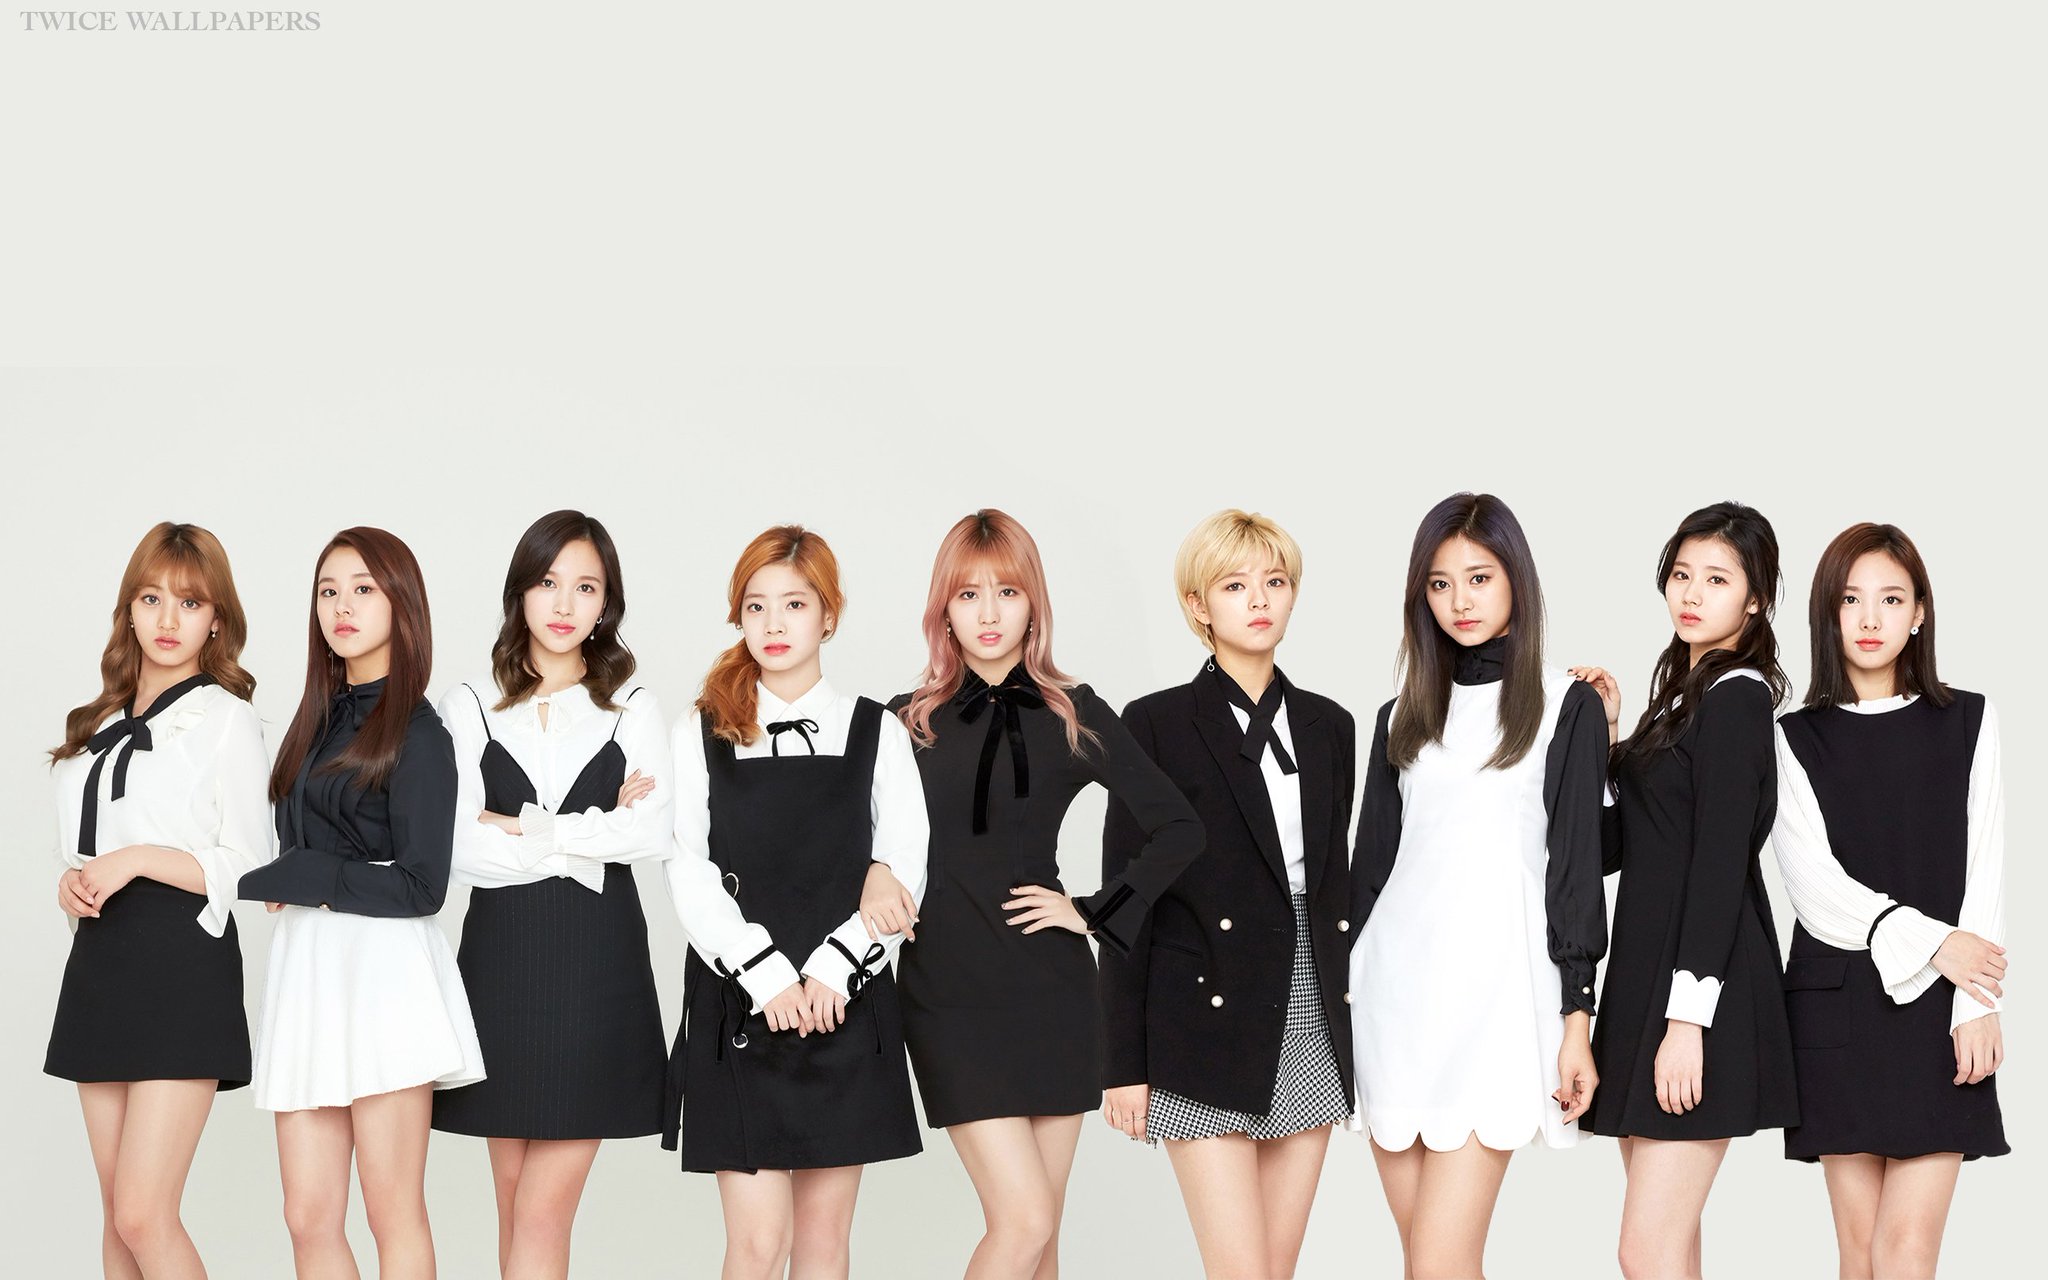 тwιce wallpaperѕ on Twitter: "TWICE X Sudden Attack 1 ...